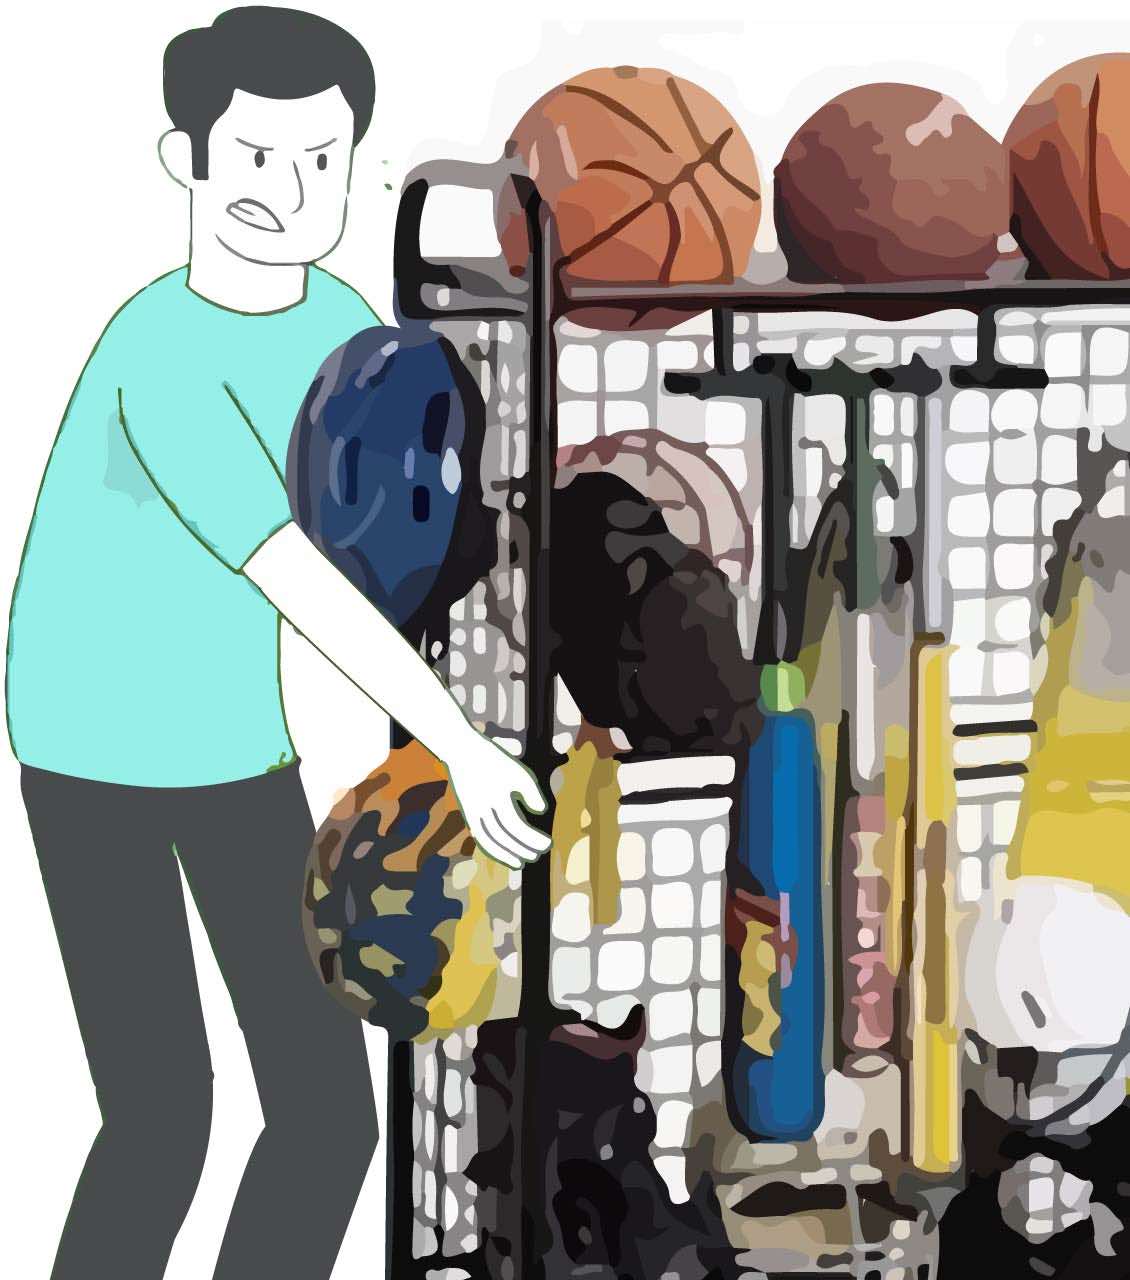 Sports Equipment Removal & Disposal Services